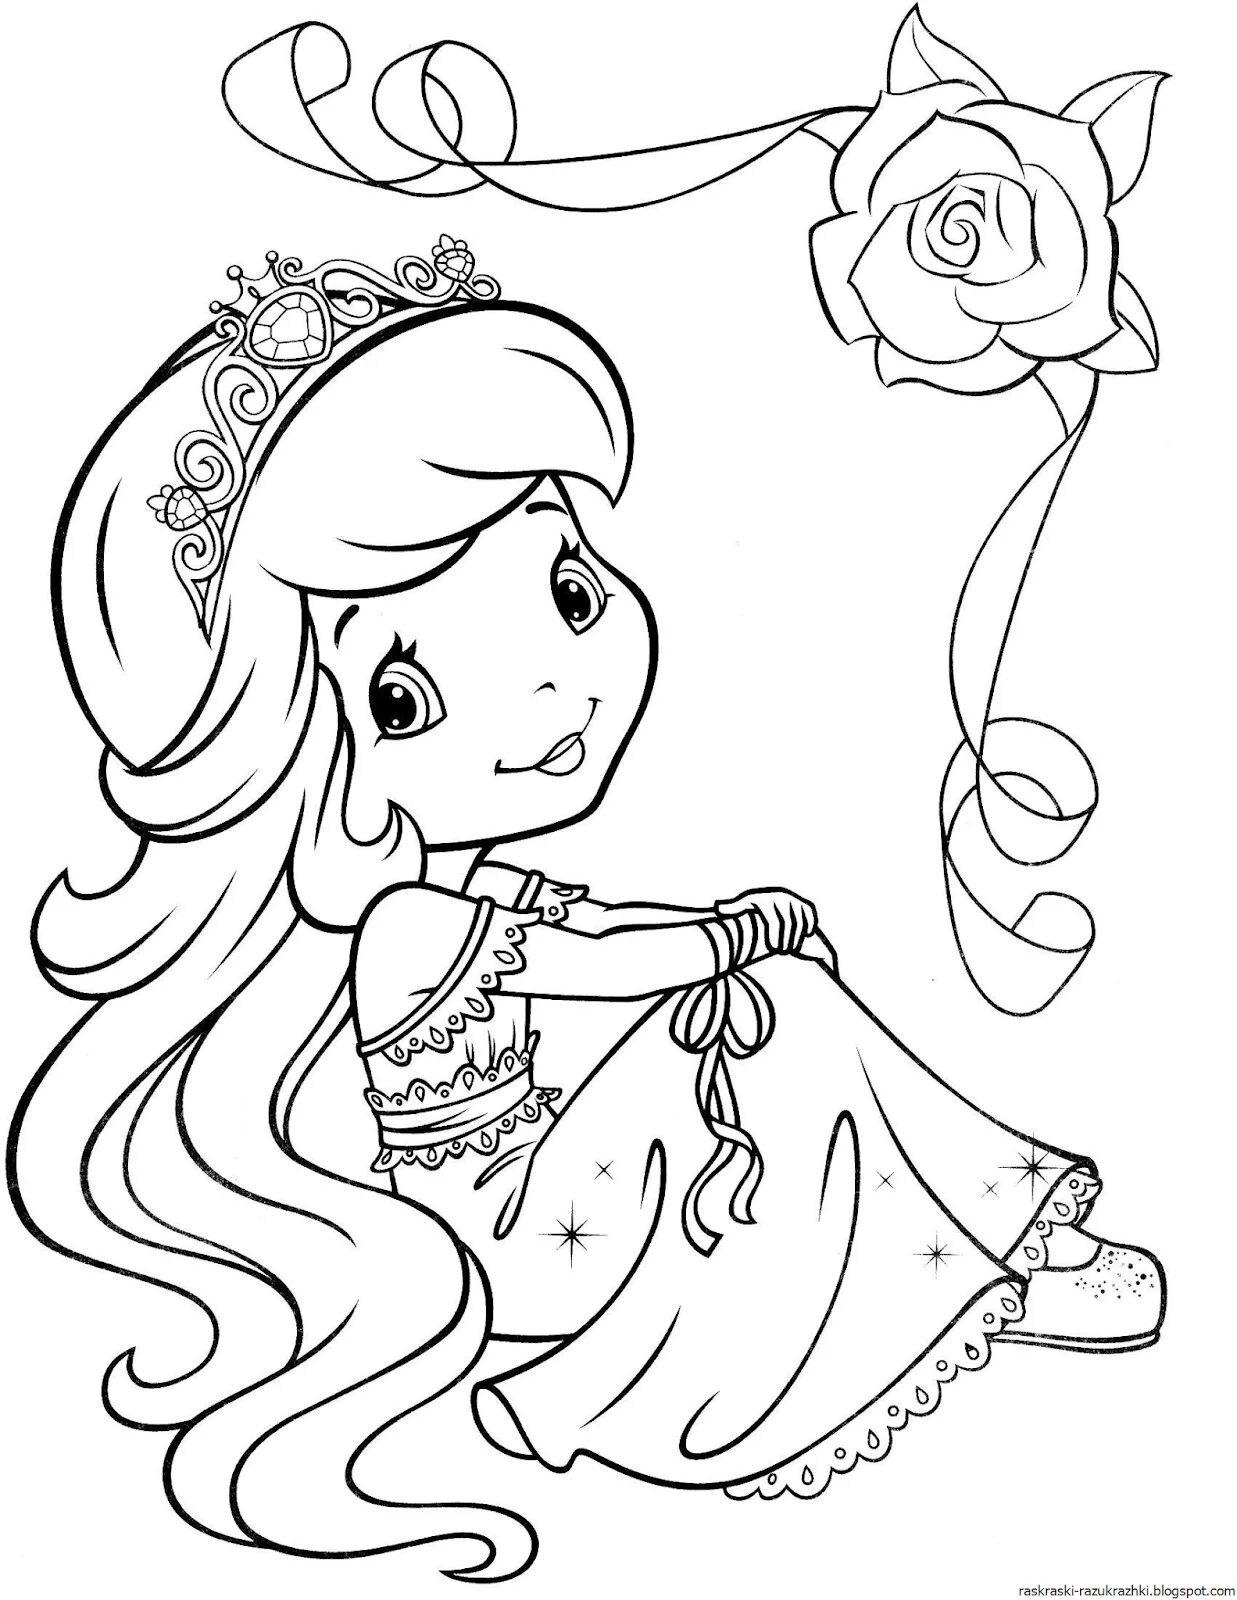 Cool coloring book for girls